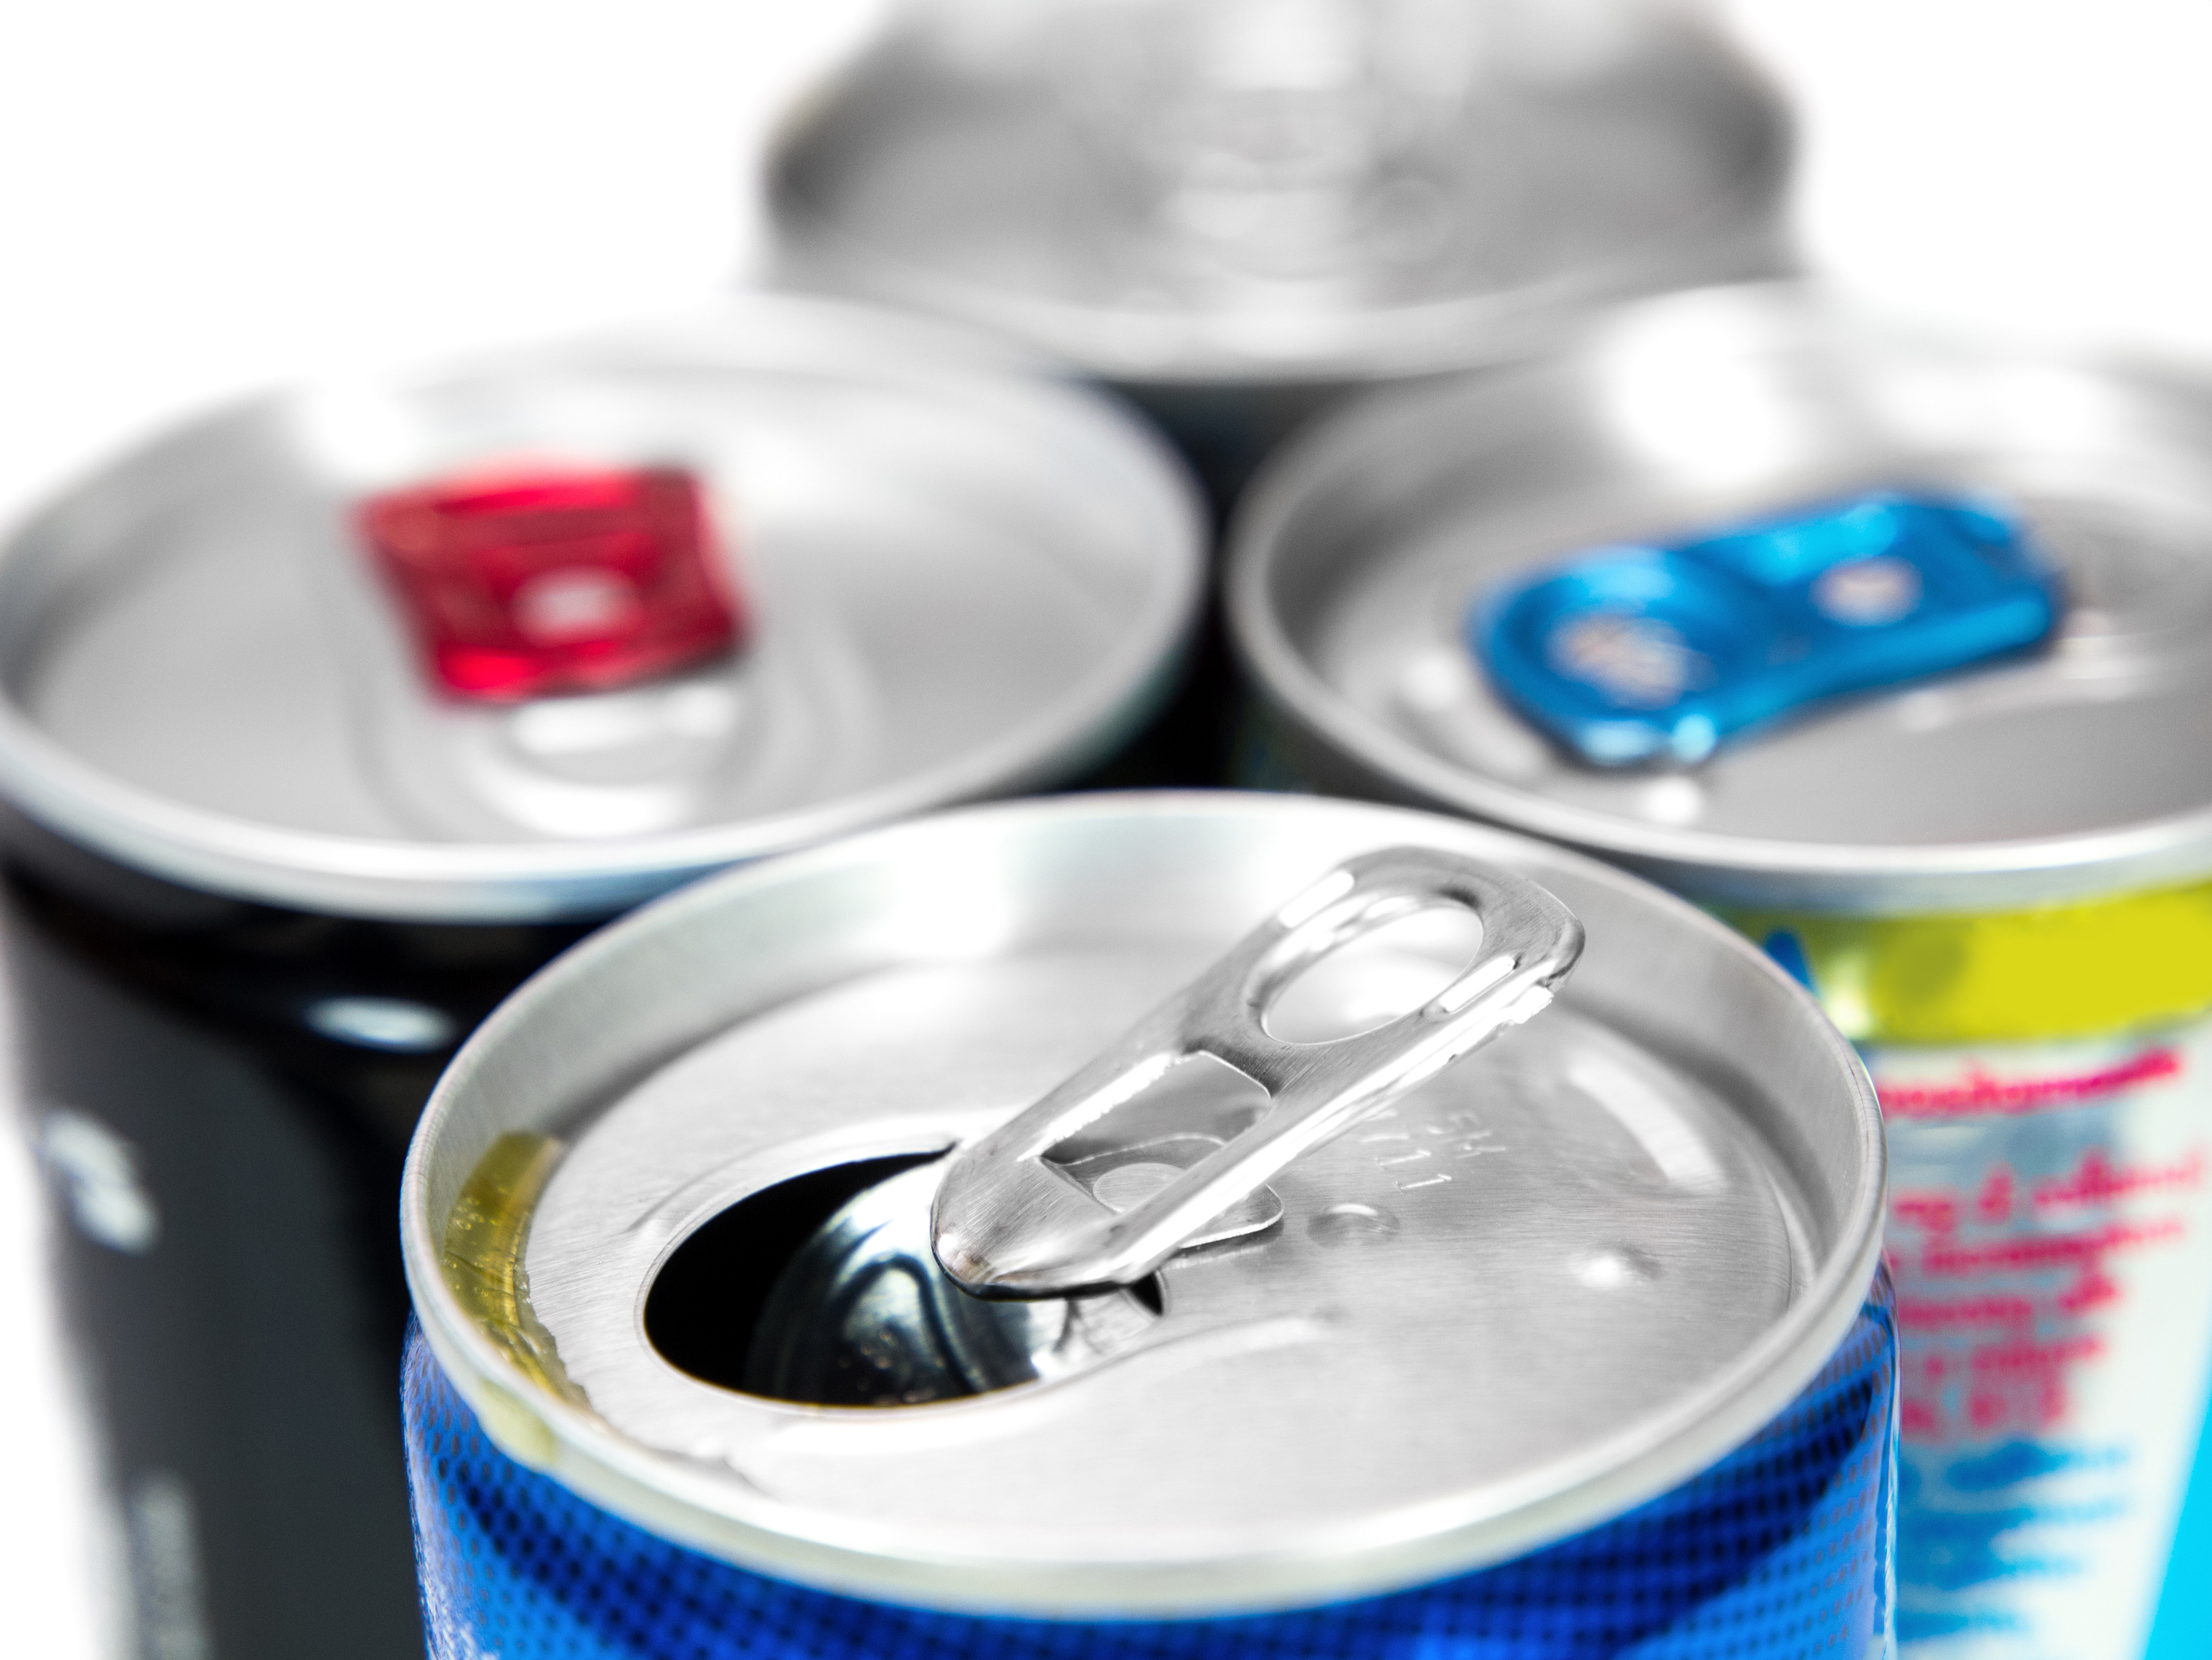 Energy drink cans (iStock)